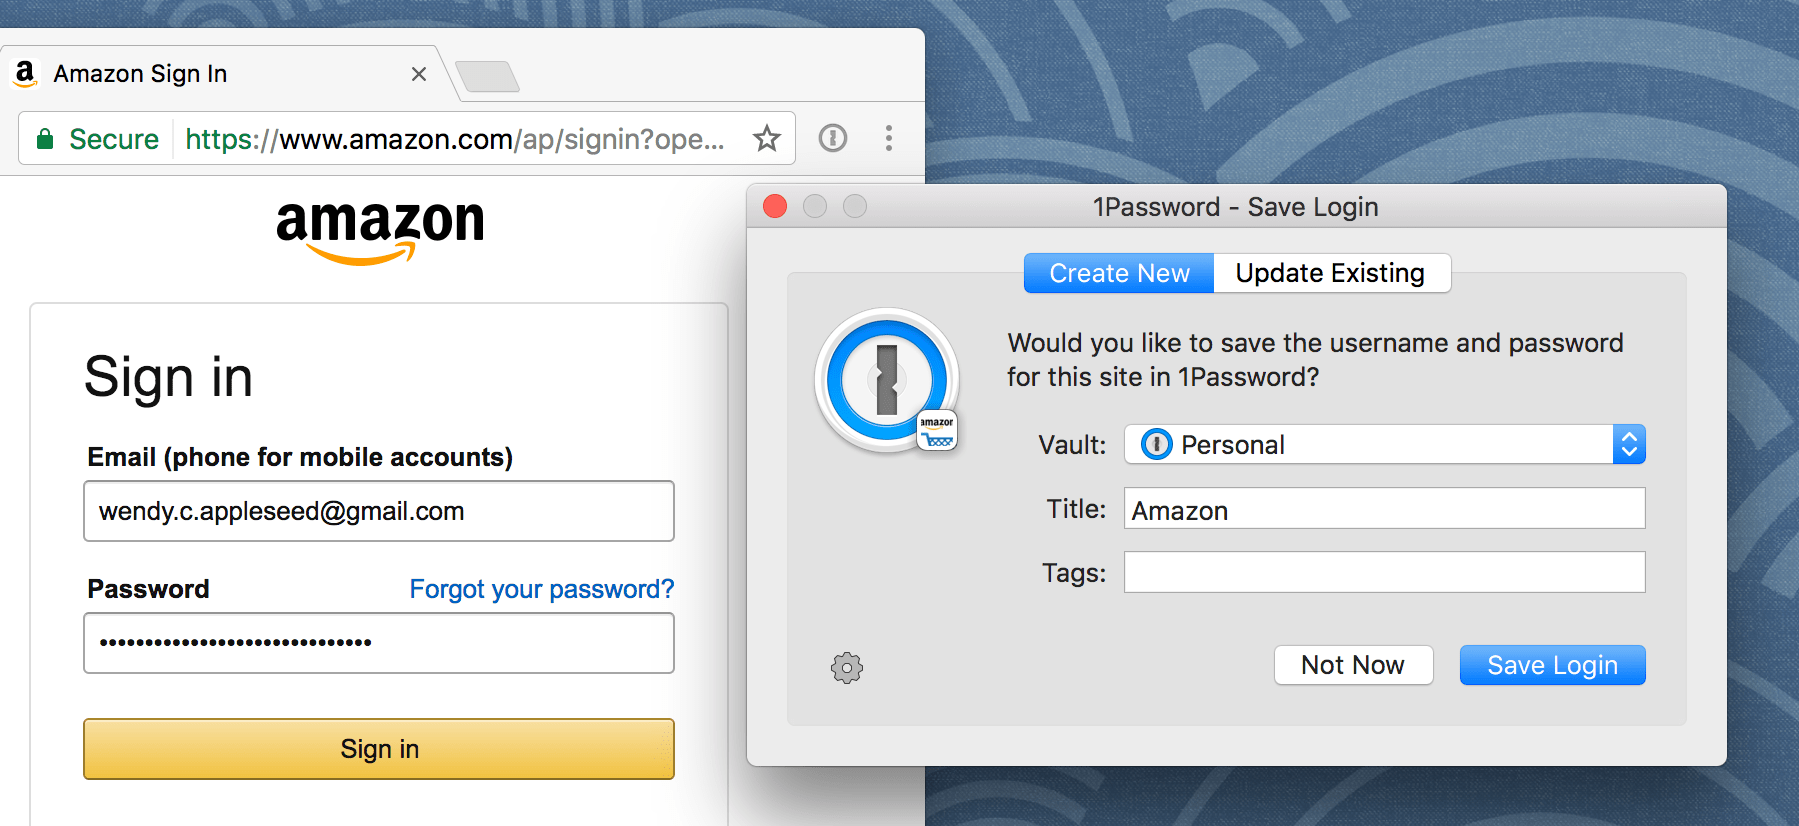 ipassword extension for chrome